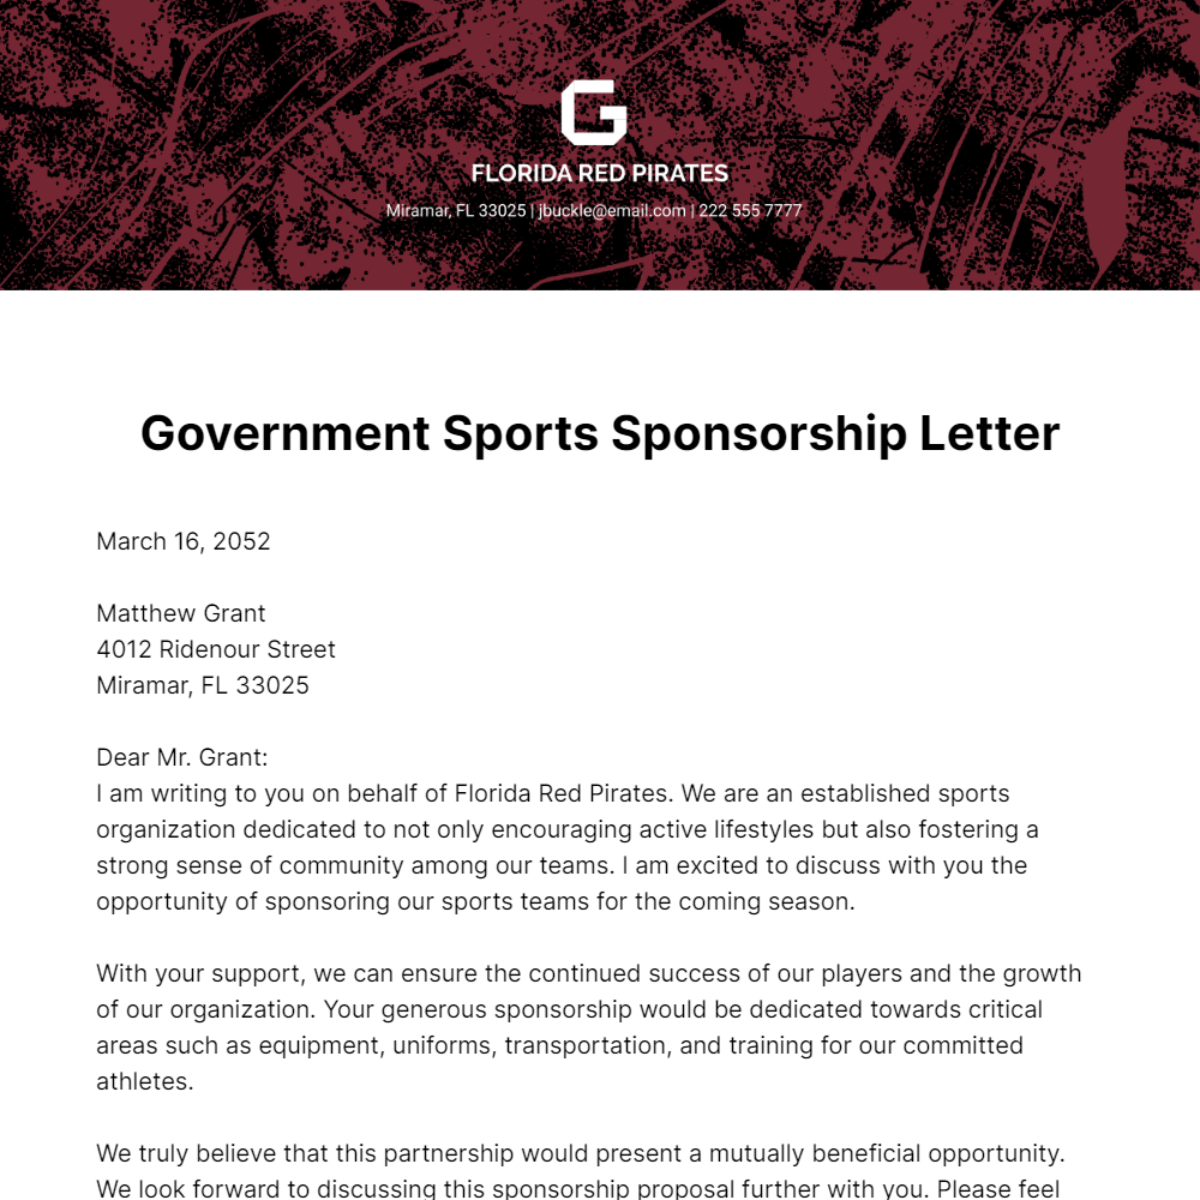 Government Sports Sponsorship Letter   Template